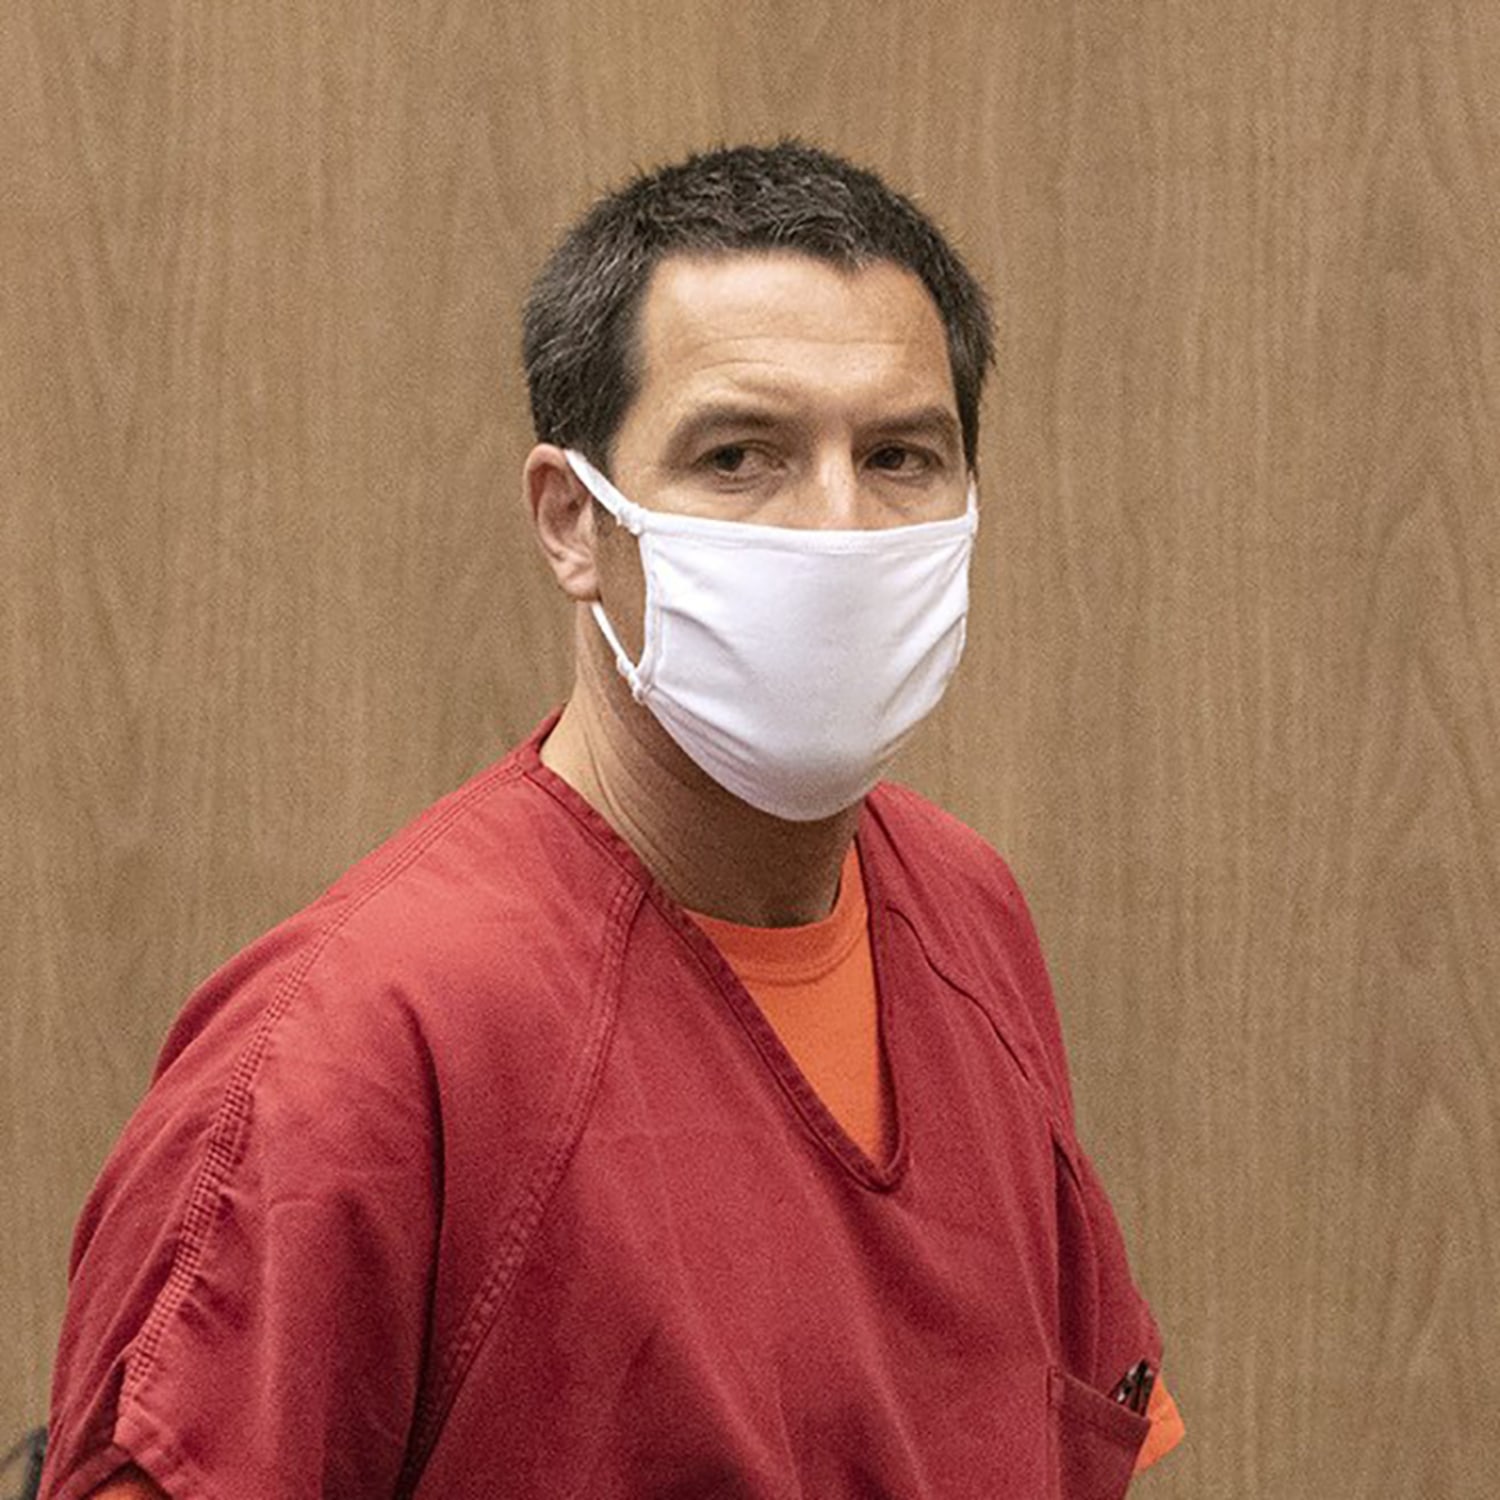 Scott Peterson, convicted of killing pregnant wife, Laci Peterson, resentenced to life in prison picture